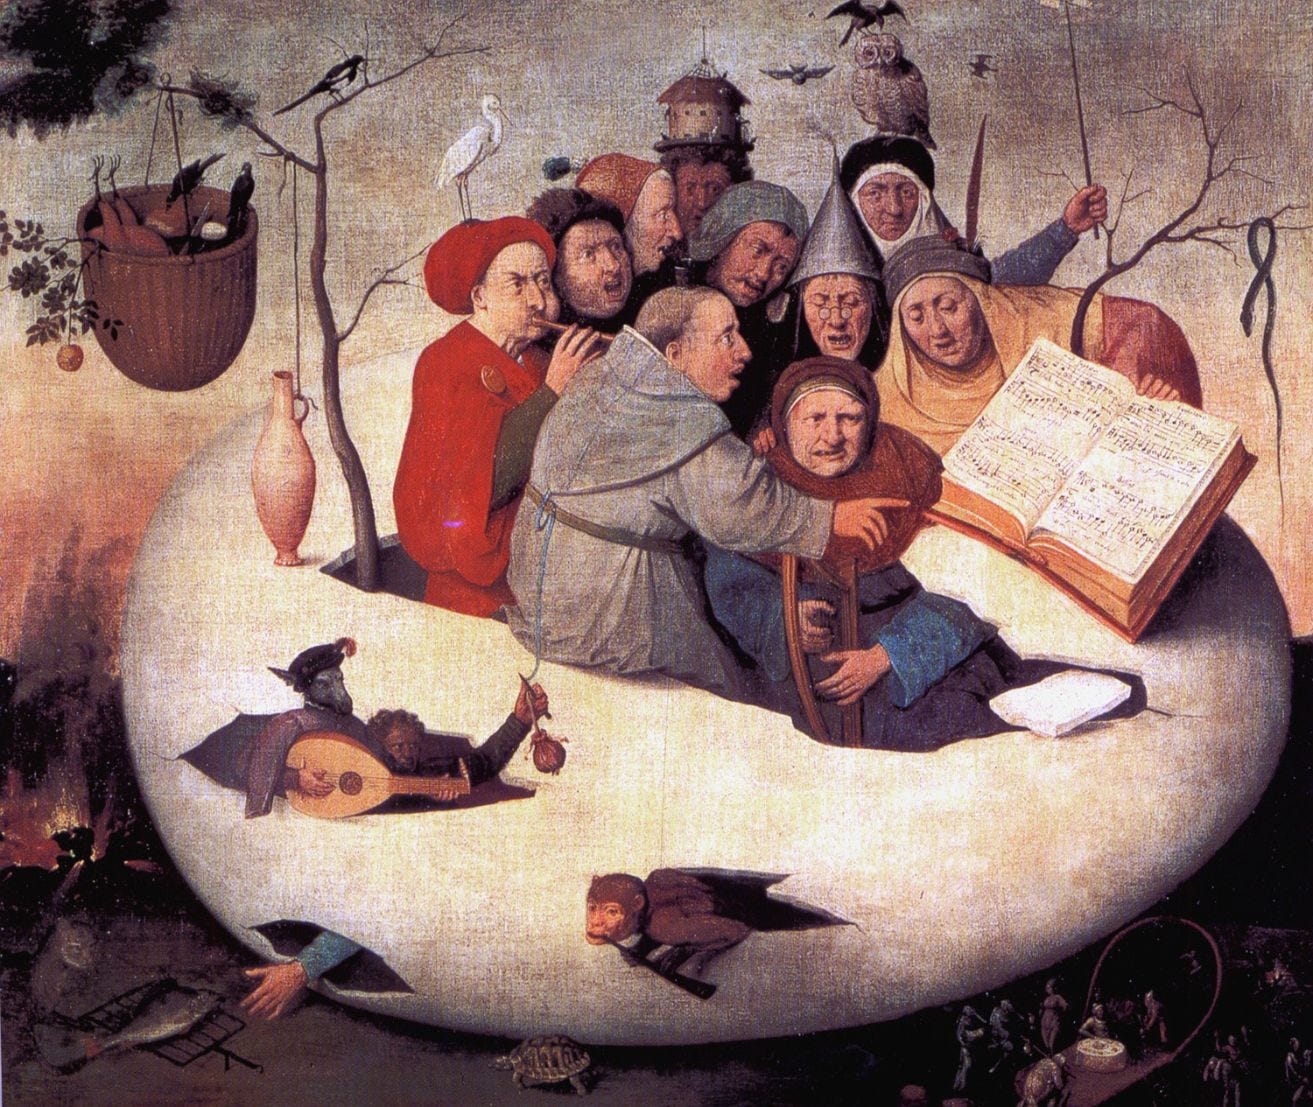 chaotic scene of medieval musicians crying and playing instruments while emerging from a cracked giant egg